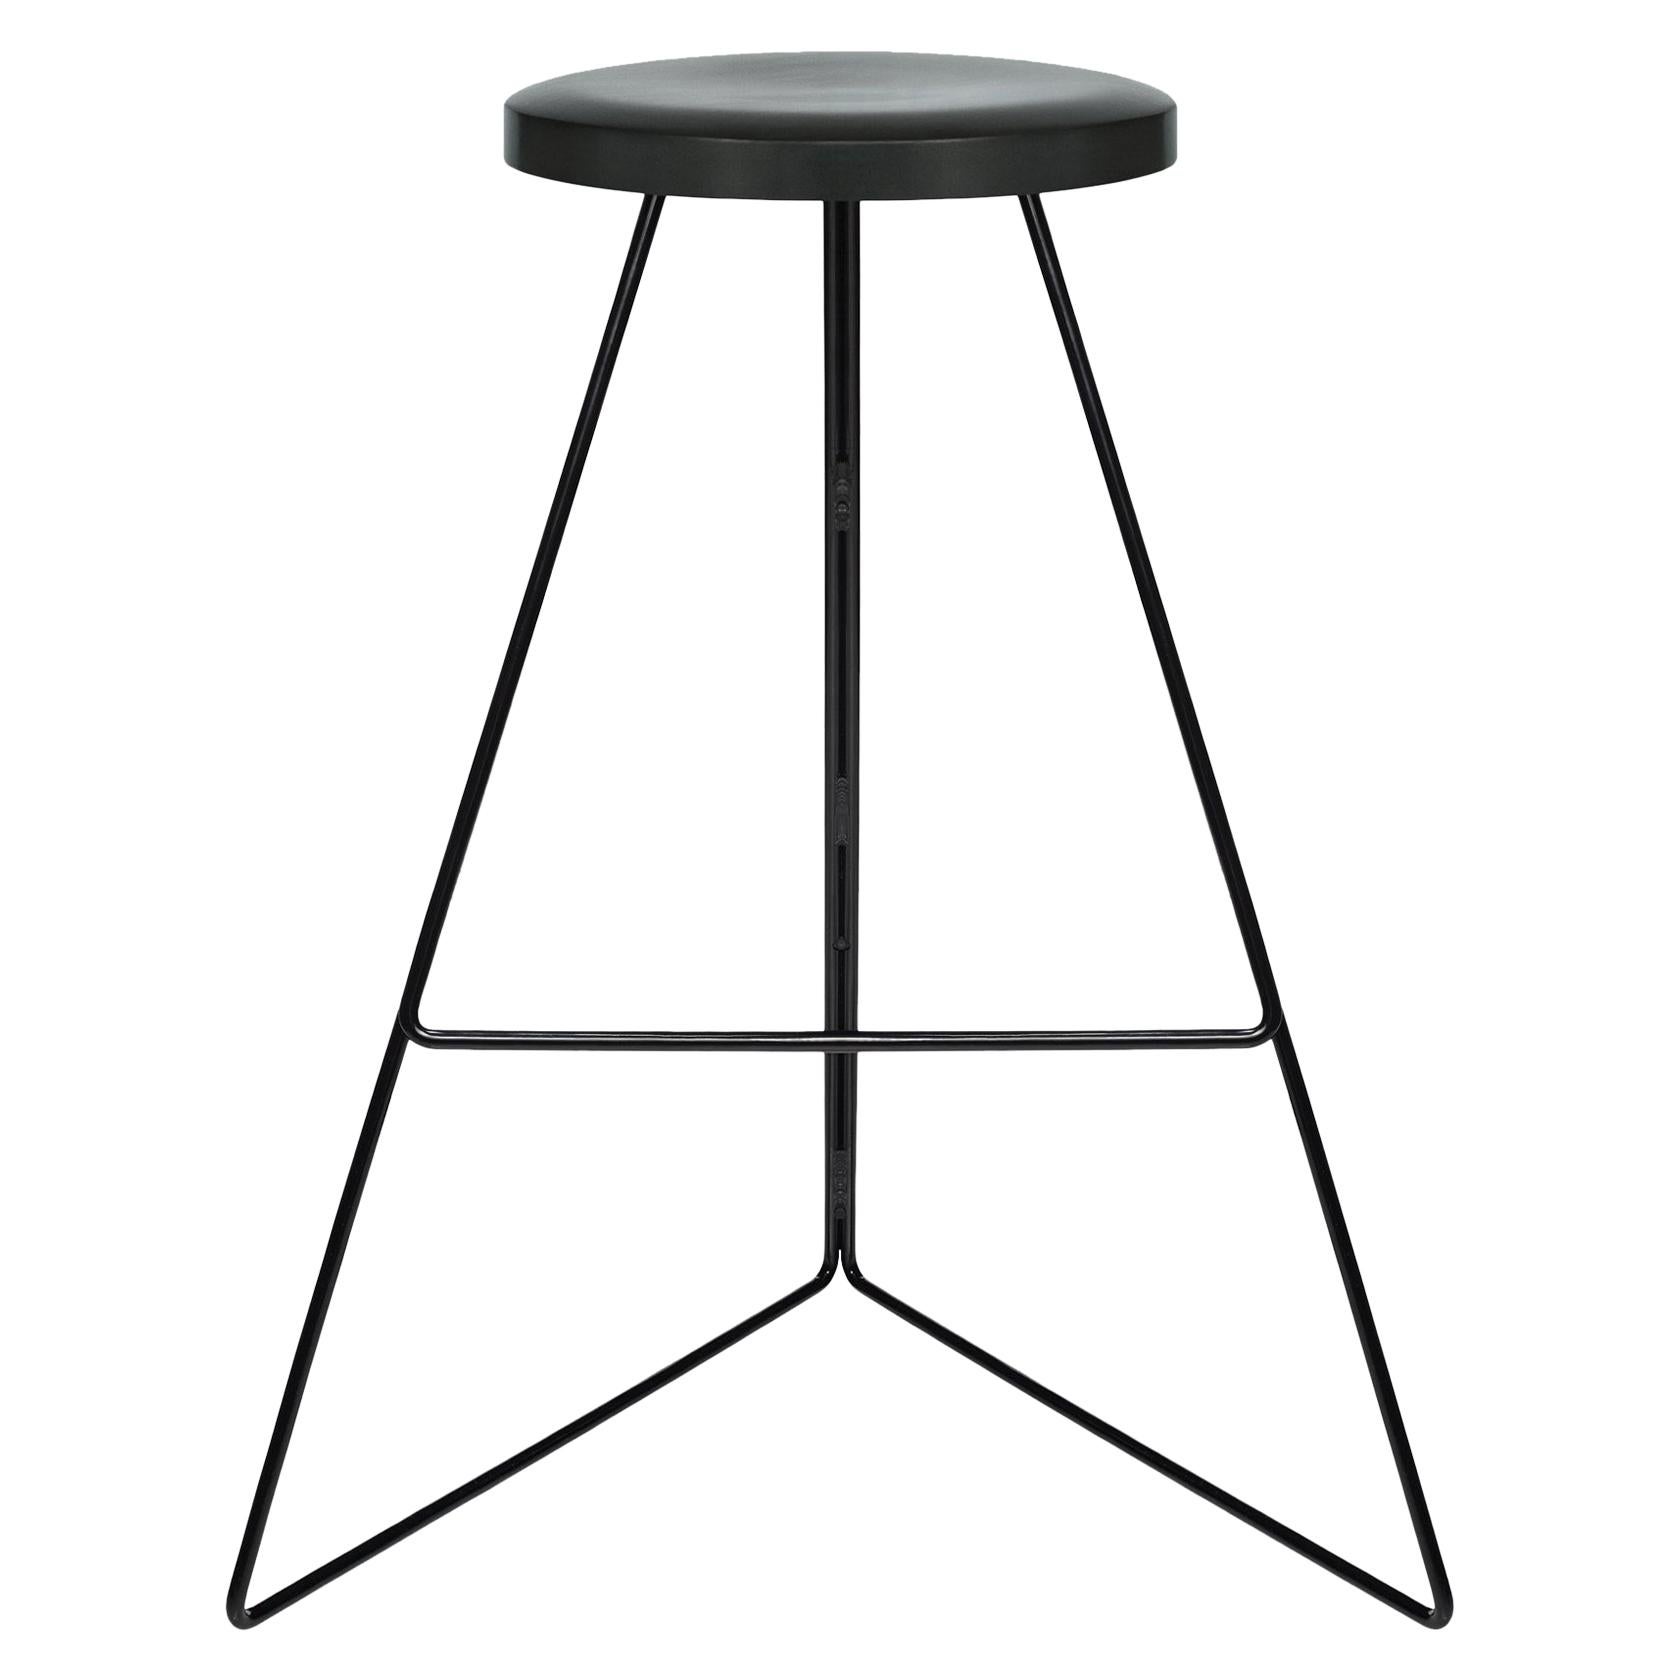 Coleman Stool, Black and Charcoal, 54 Variations For Sale